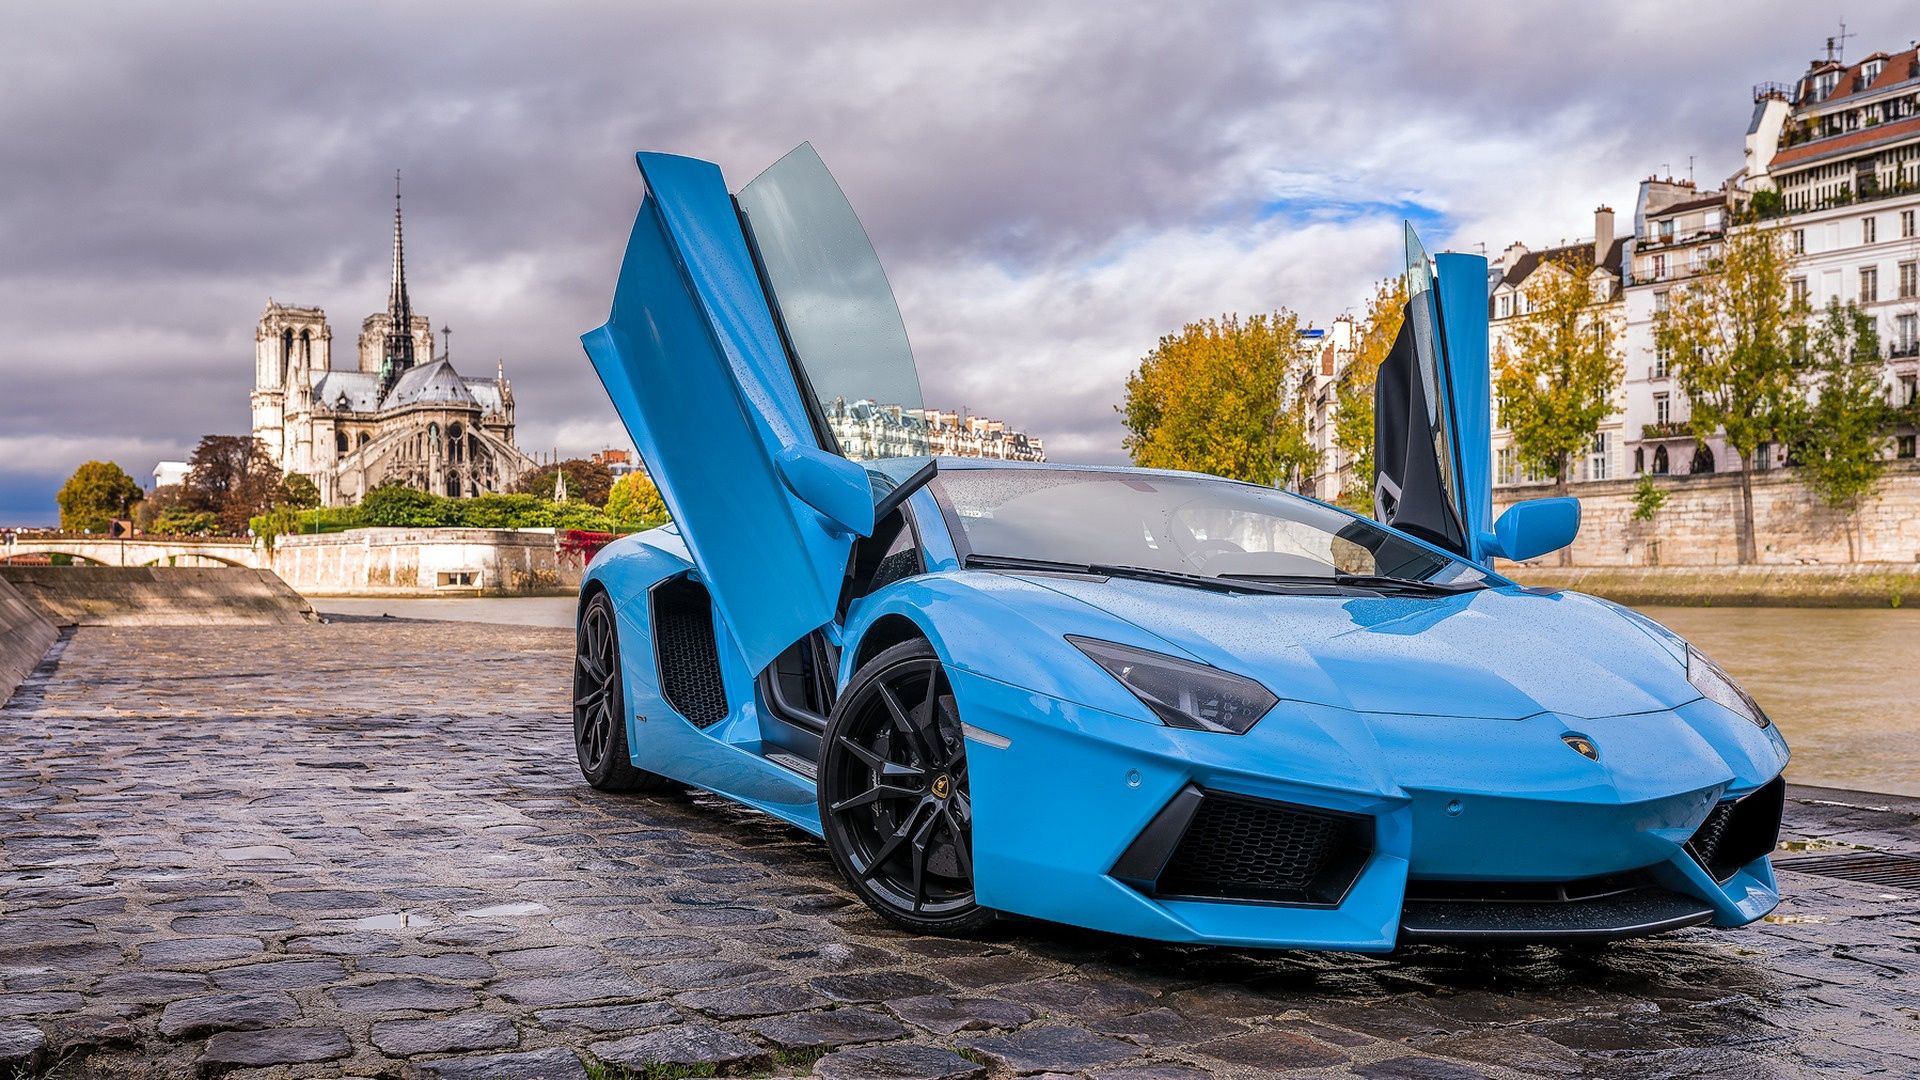 The Best Wallpapers Related to Lamborghini, Aventador, Blue (3) - Desktop  Wallpapers